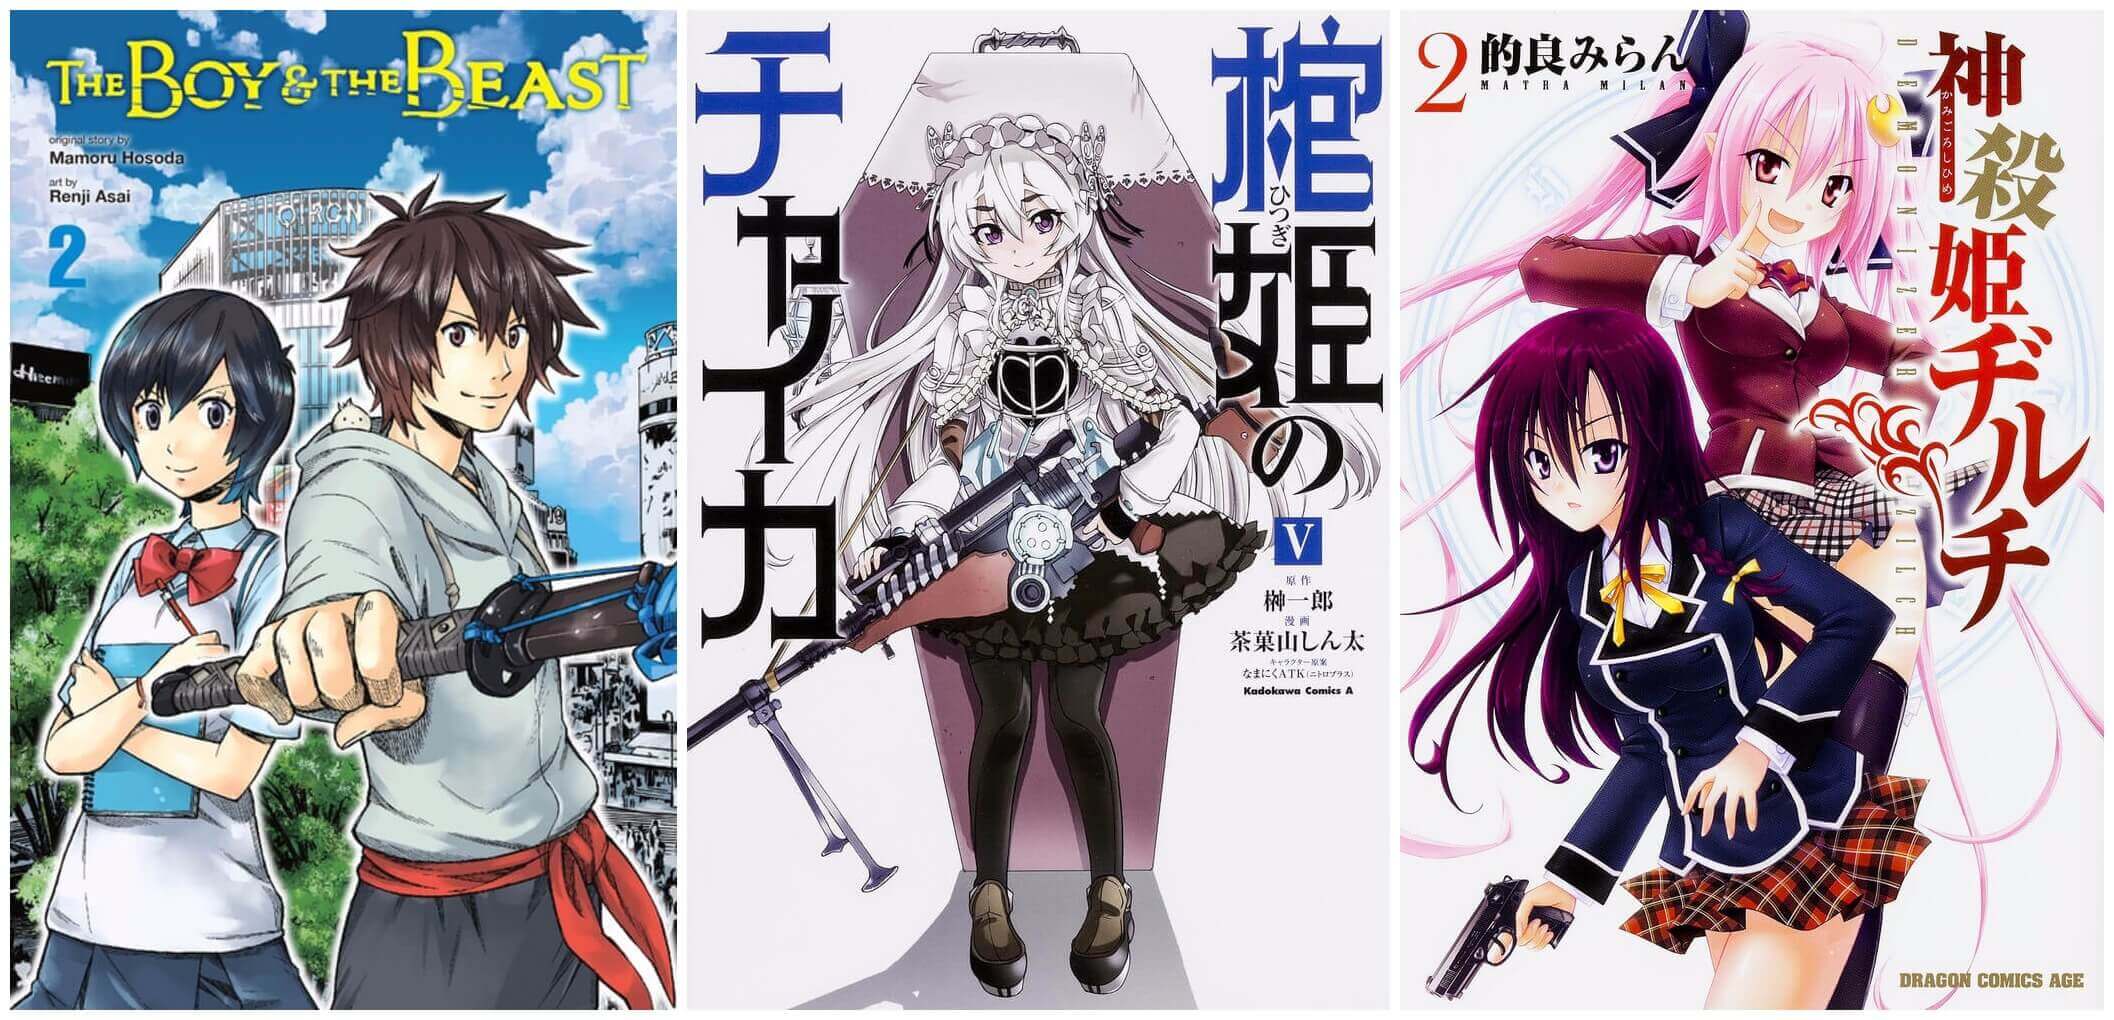 September 2016 Manga Releases Covers for The Boy and the Best, Chaika, and Demonizer Zilch.